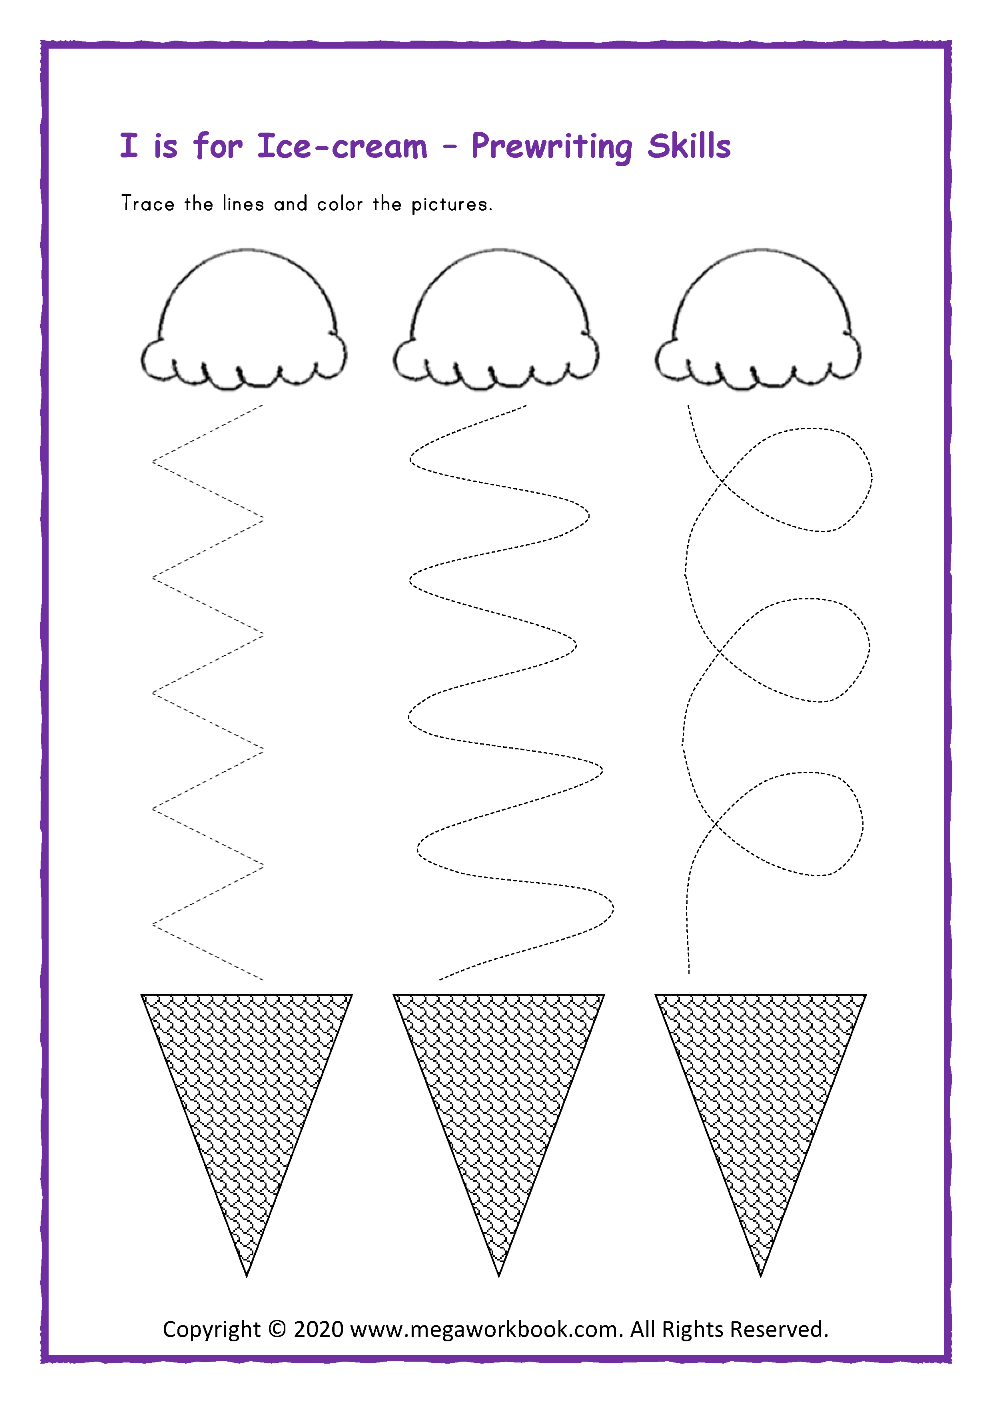 tracing-the-letter-i-worksheets-for-preschool